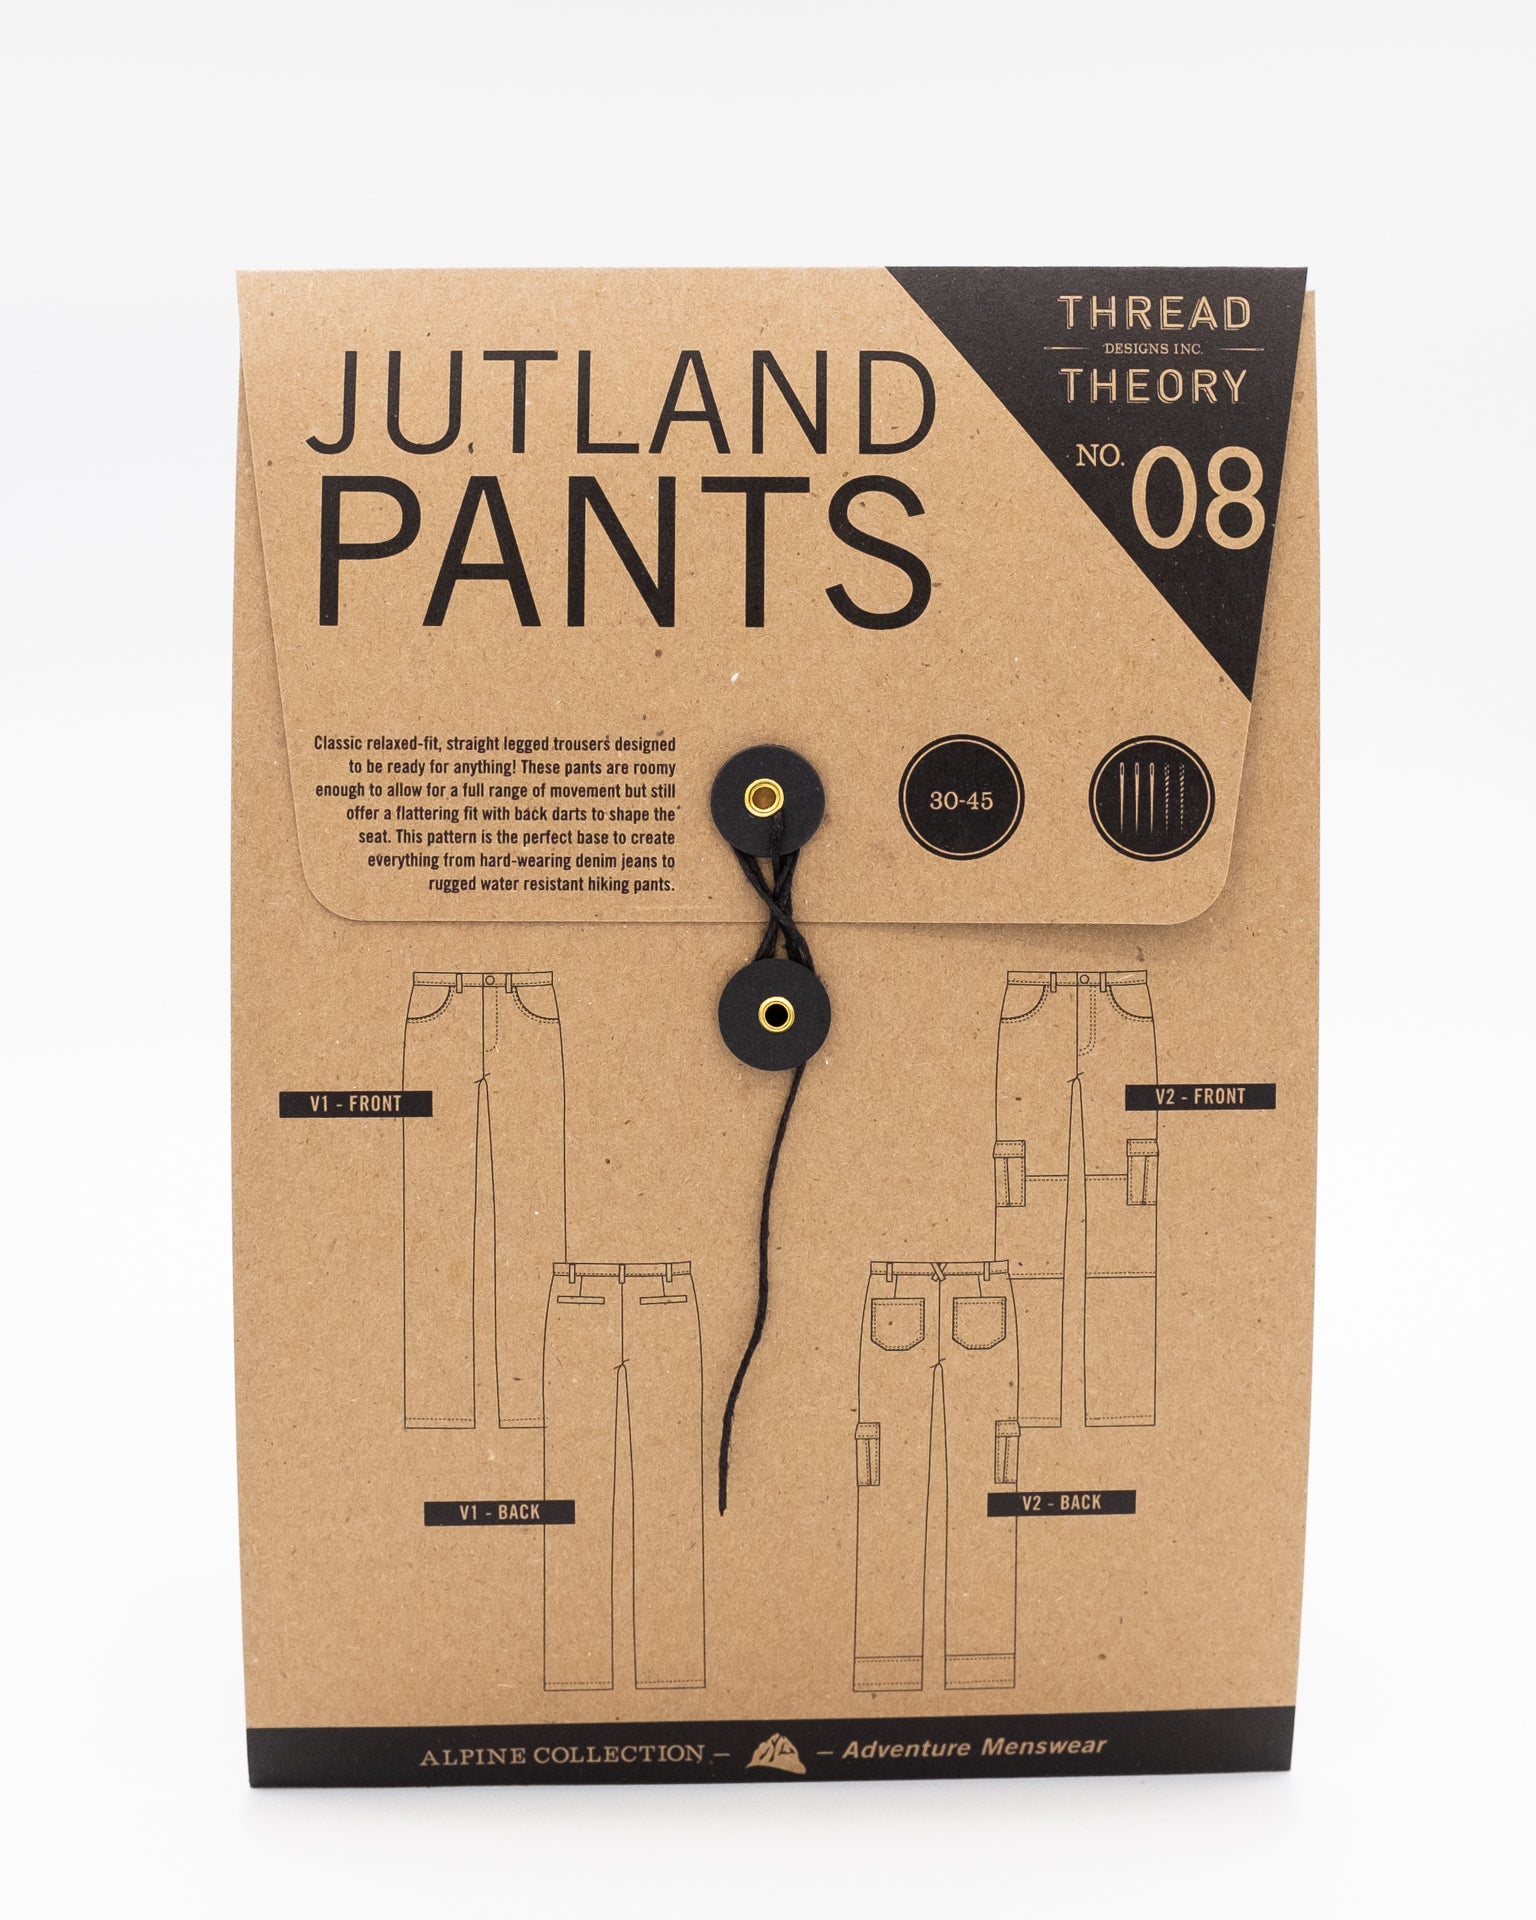 Thread Theory Fulford Jeans